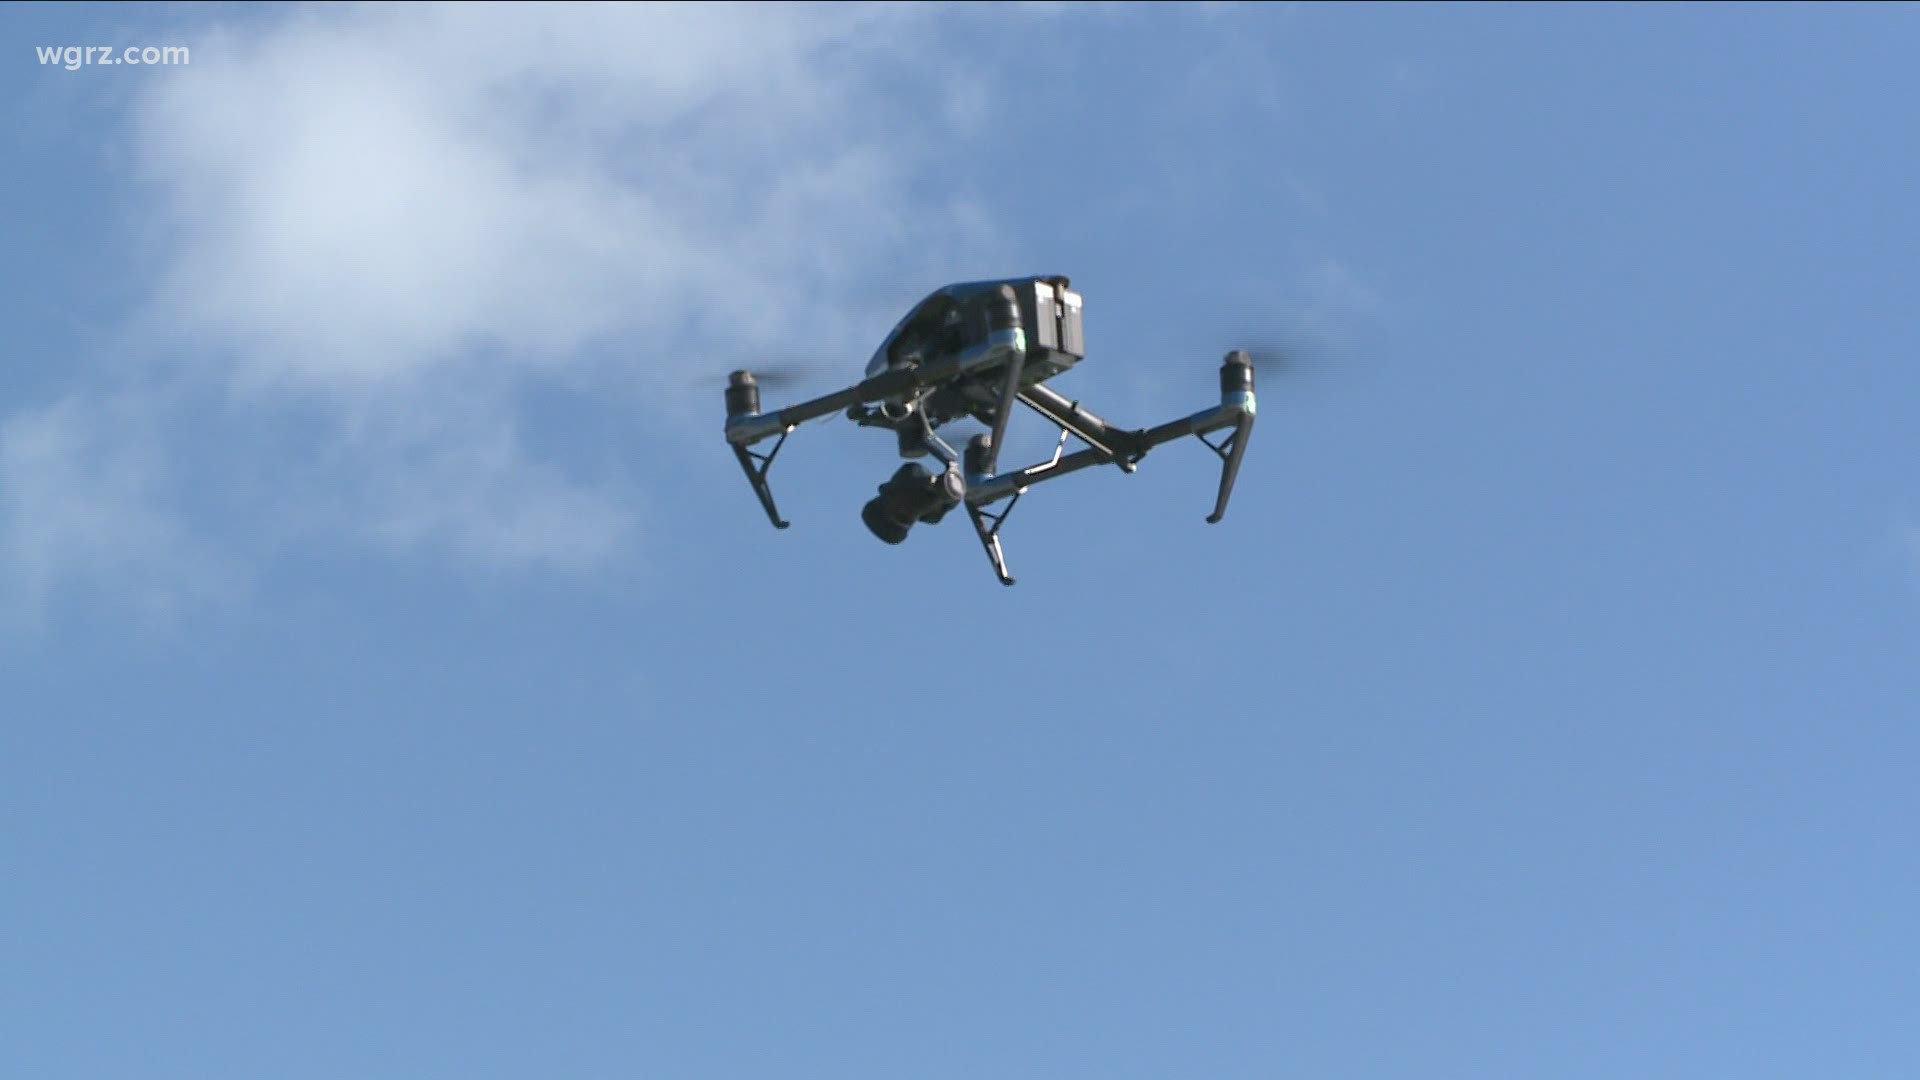 Right now in Cheektowaga drones are being used as part of an experimental partnership, to also help in the battle against COVID.